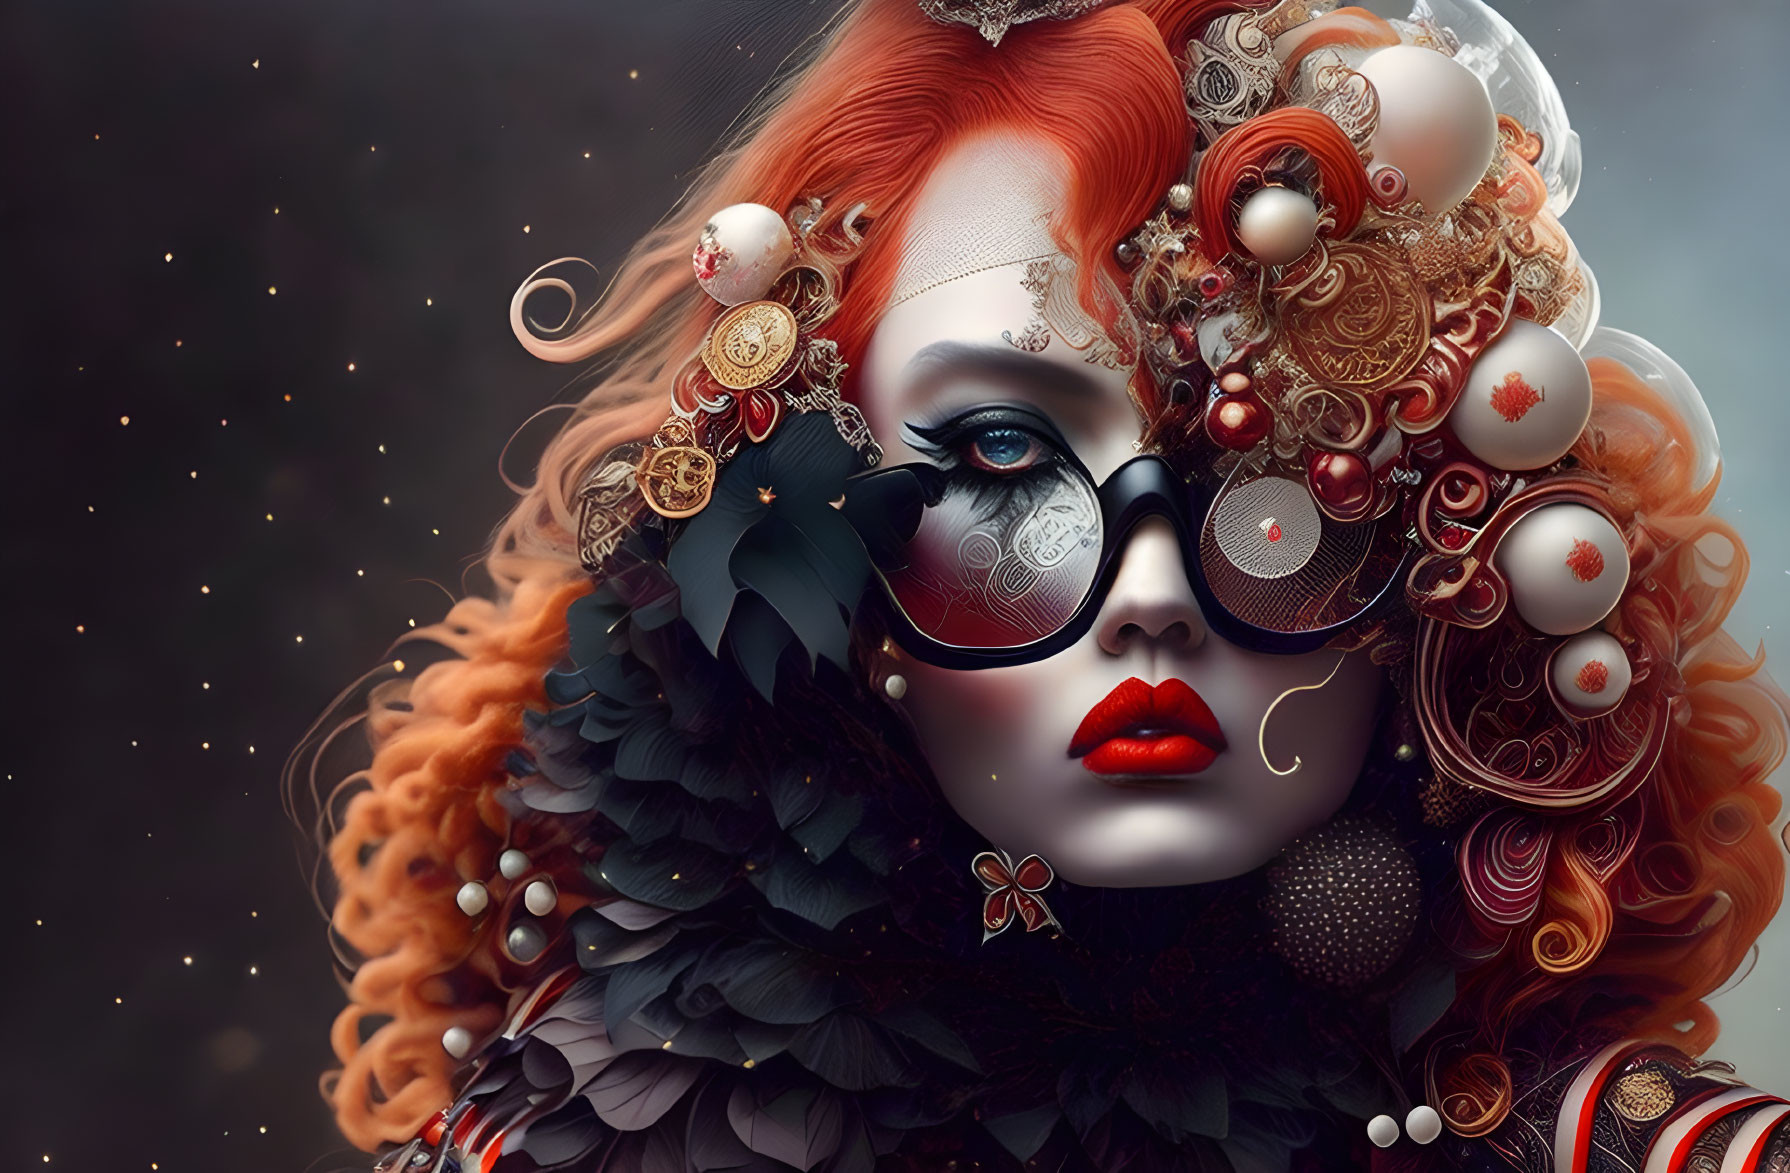 Vibrant digital artwork featuring a woman with red curly hair and steampunk accessories